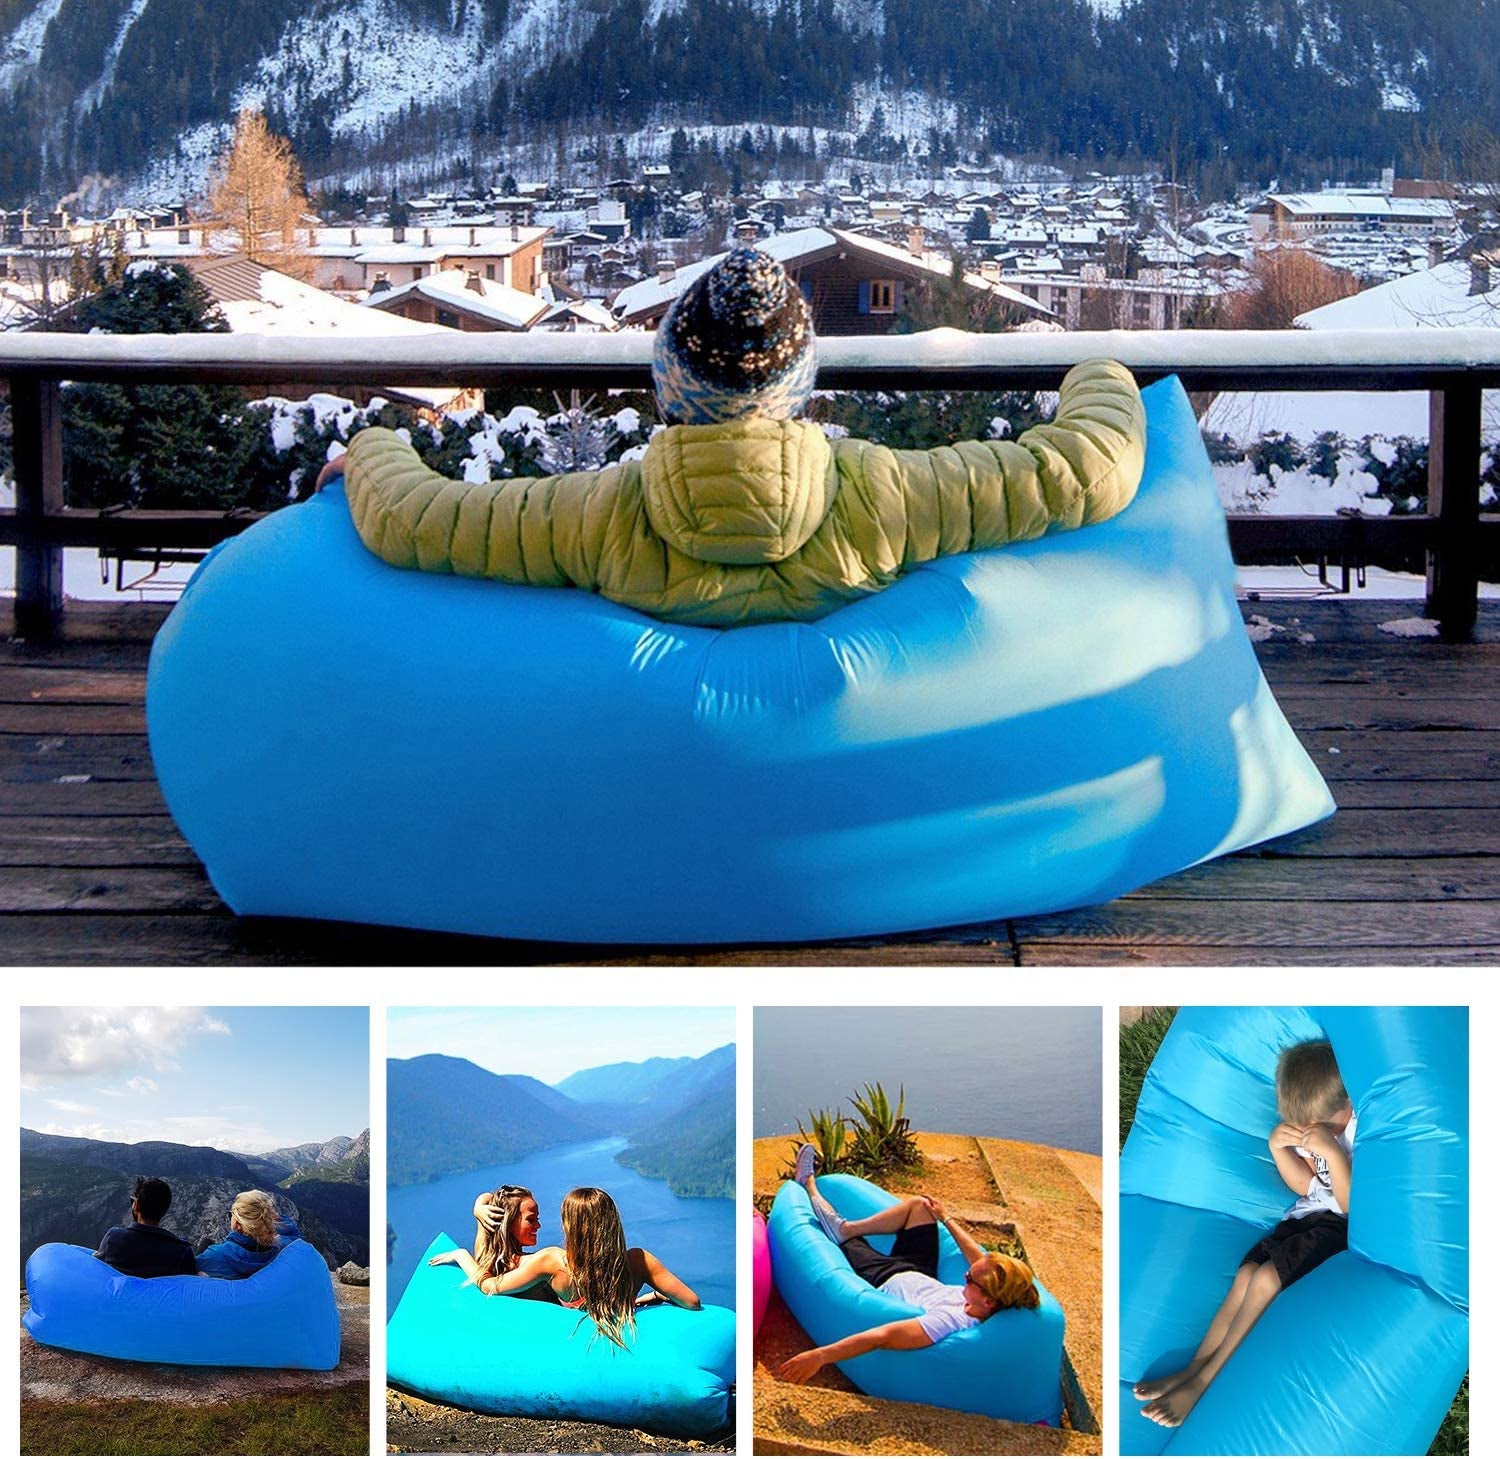 Inflatable Lounger,  Water Proof& Anti-Air Leaking Design-Ideal Inflatable Couch, Portable Hommock and Air Sofa for Travelling, Camping, Hiking and Beach Parties